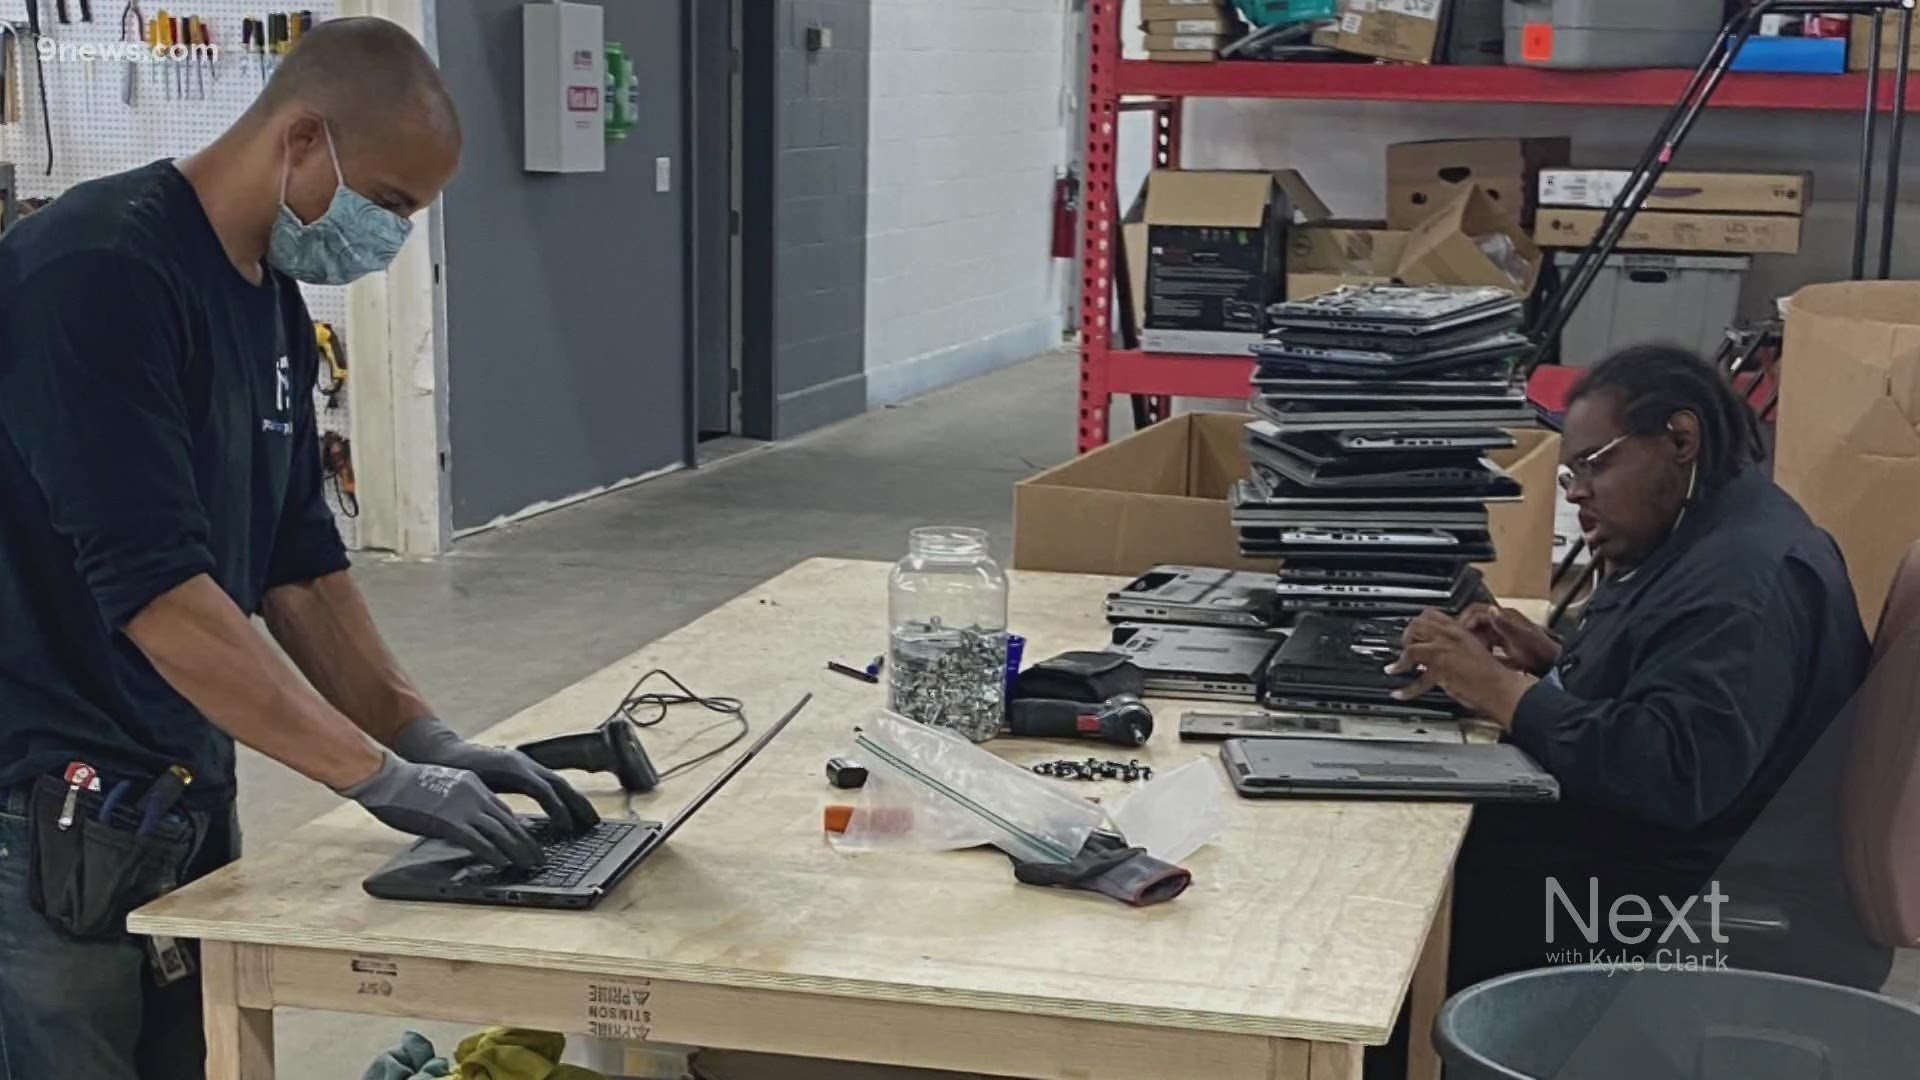 This nonprofit is about connection. It refurbishes laptops and offers low-cost internet and now, it's giving technology to seniors to help them stay connected.